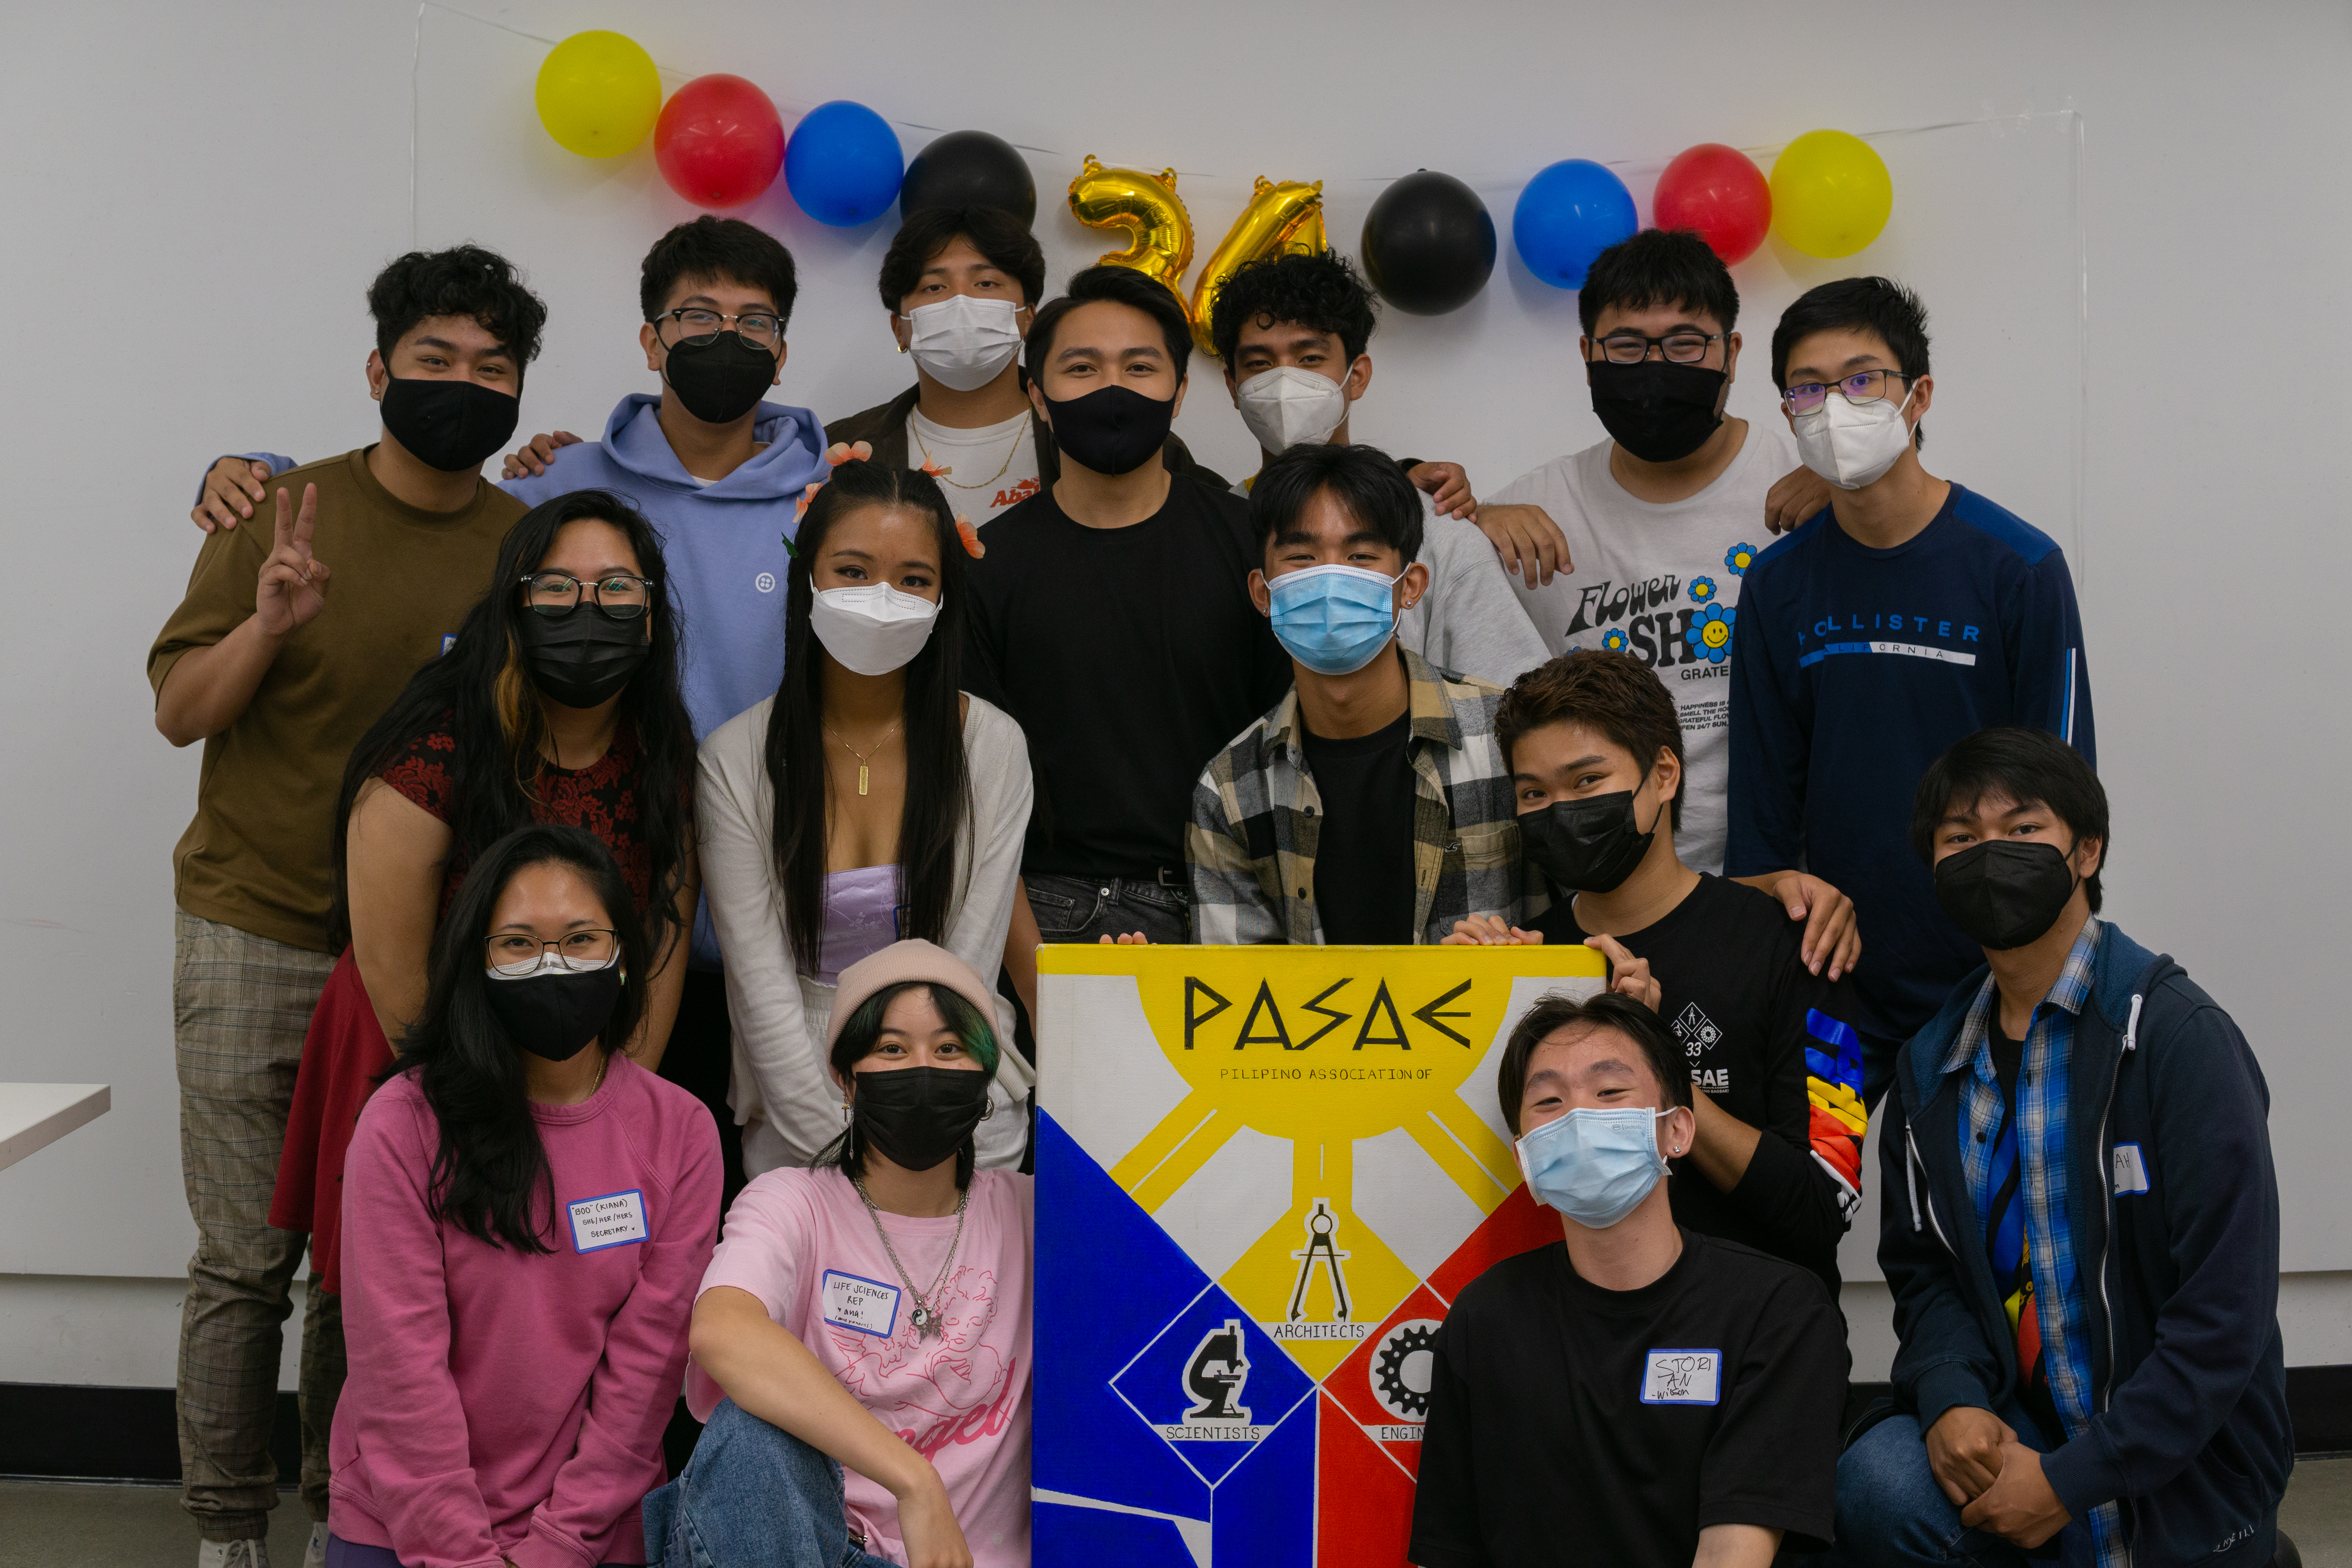 Current PASAE Core (Group Photo)